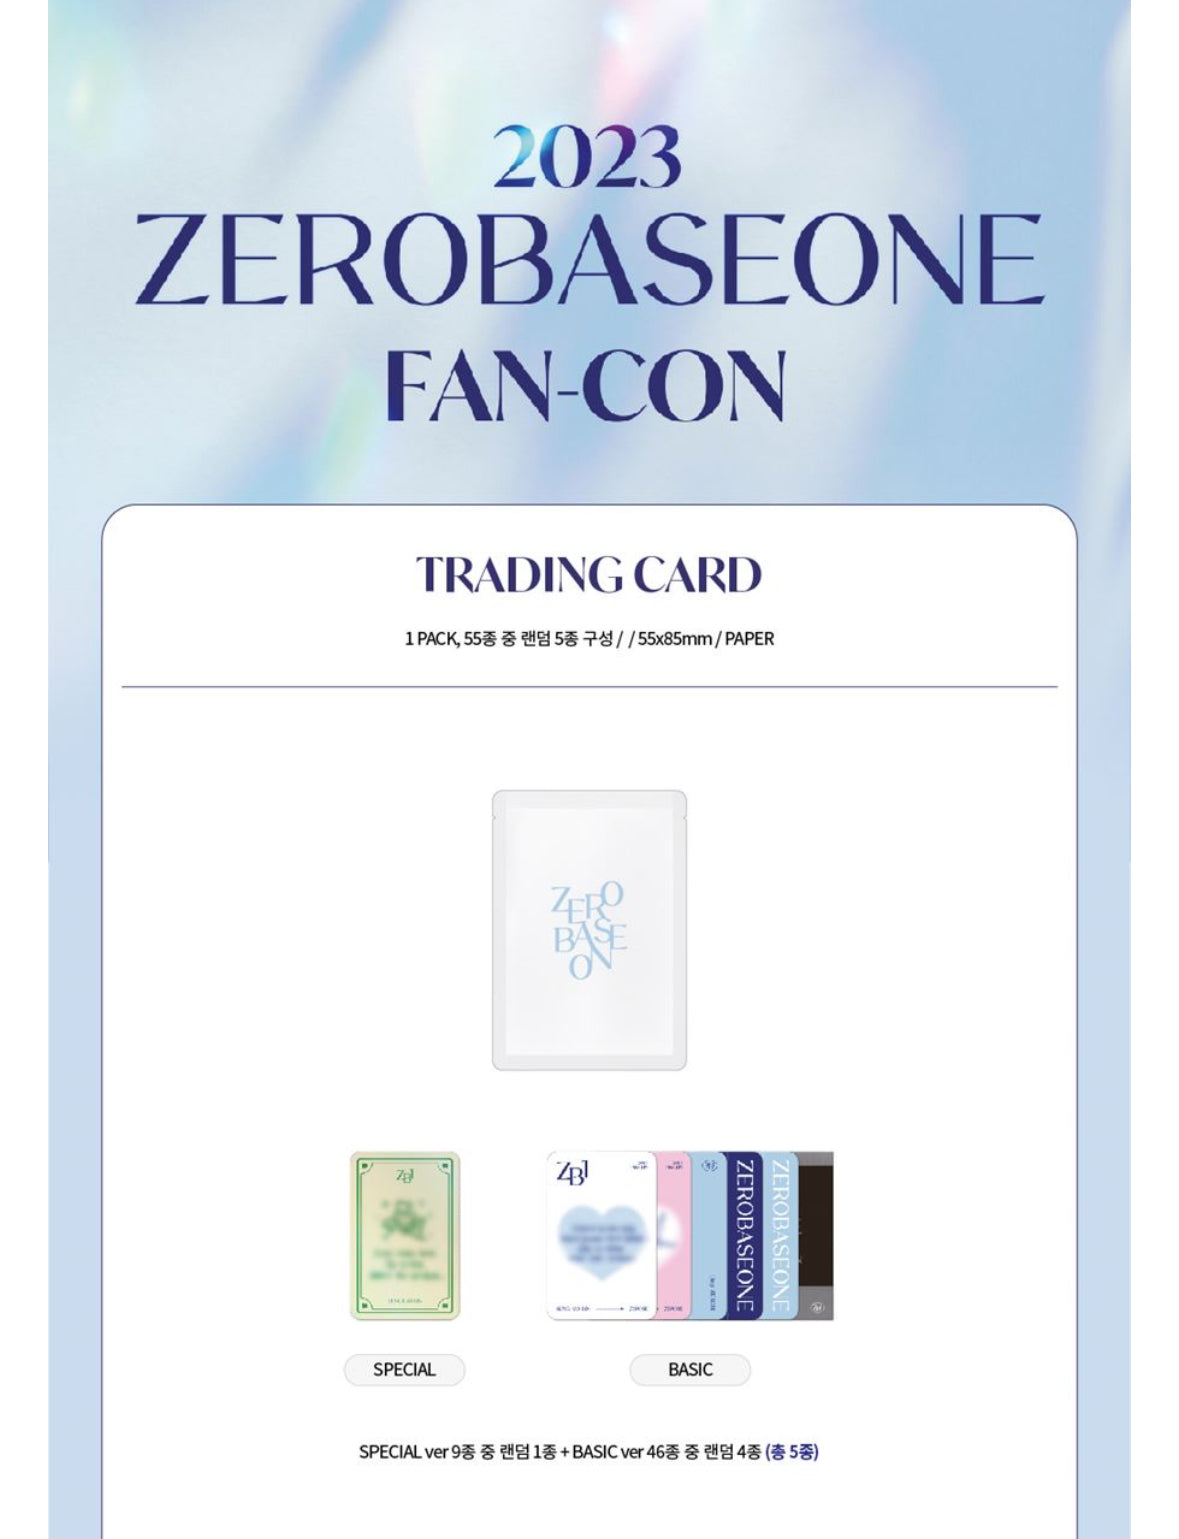 (2-PACK SET) ZEROBASEONE (ZB1) FAN-CON MD TRADING CARD